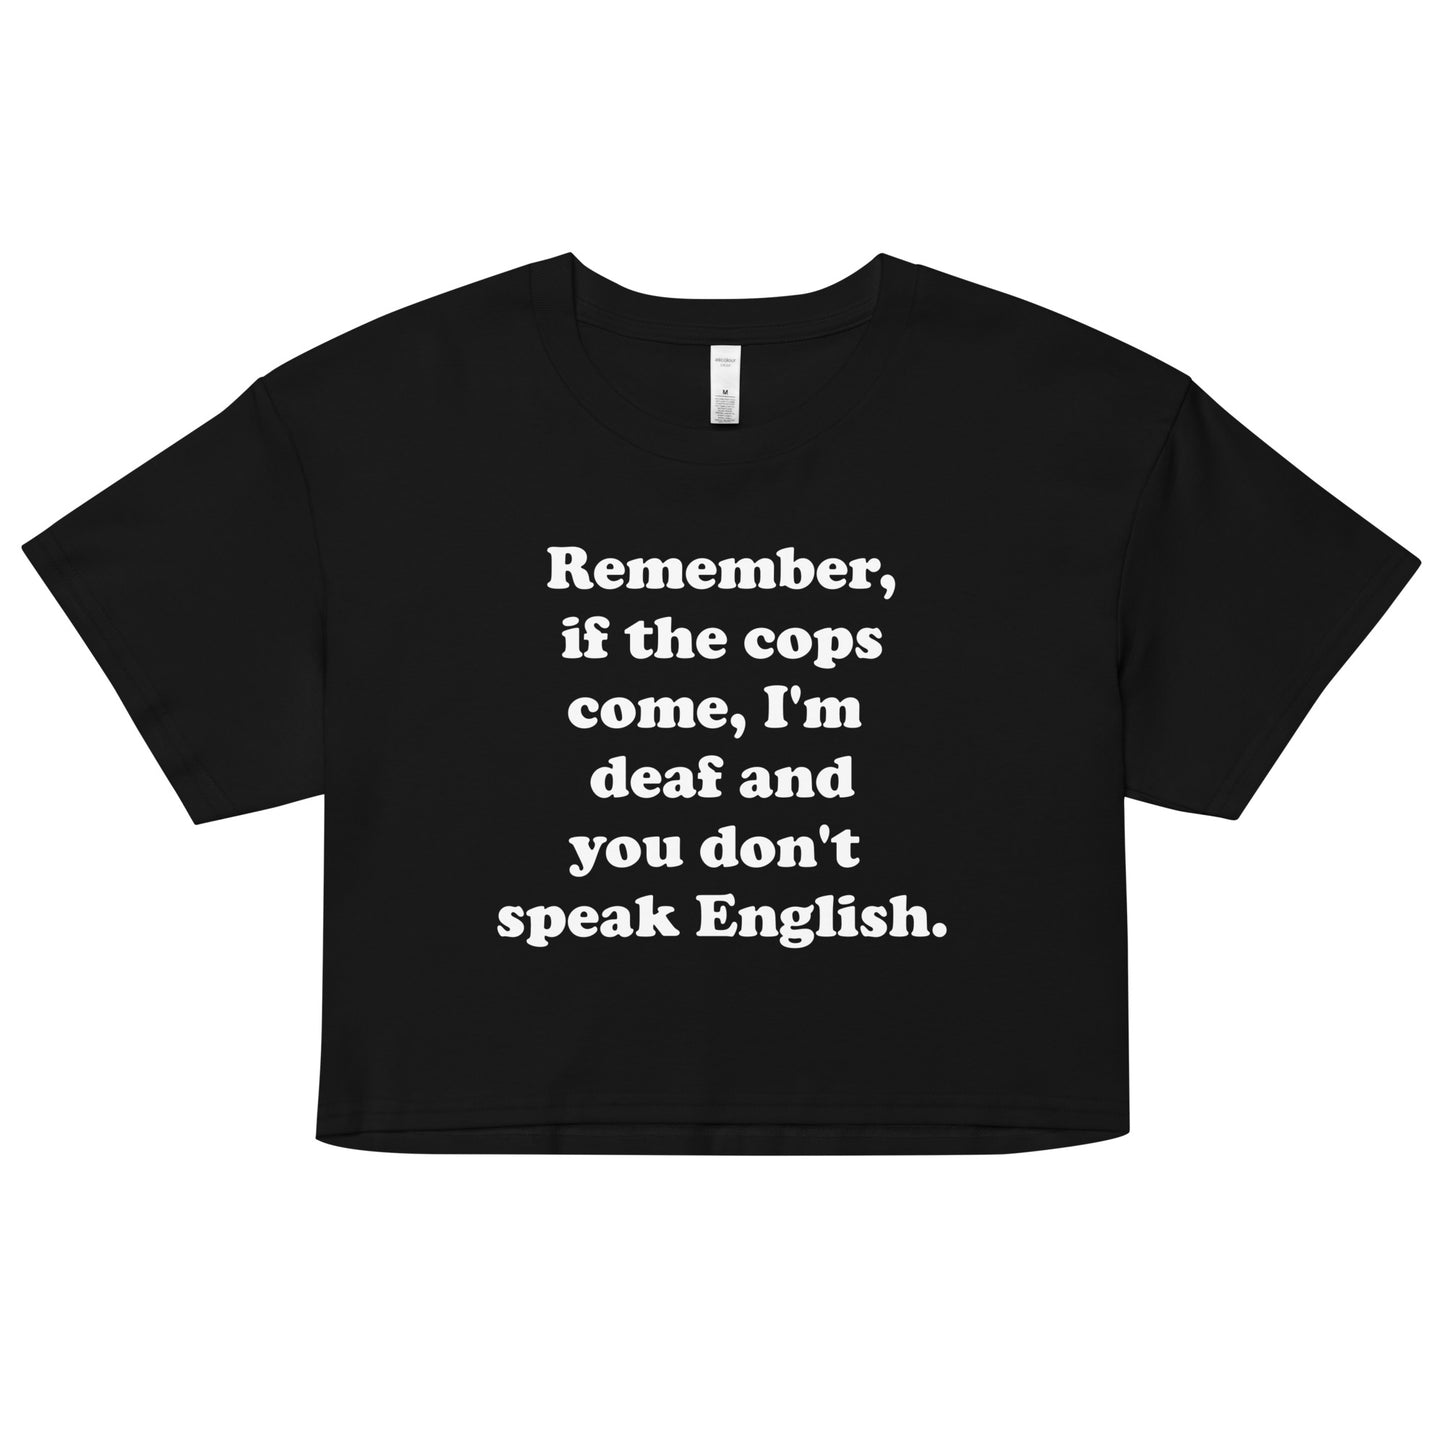 I'm deaf, and you don't speak English crop top.